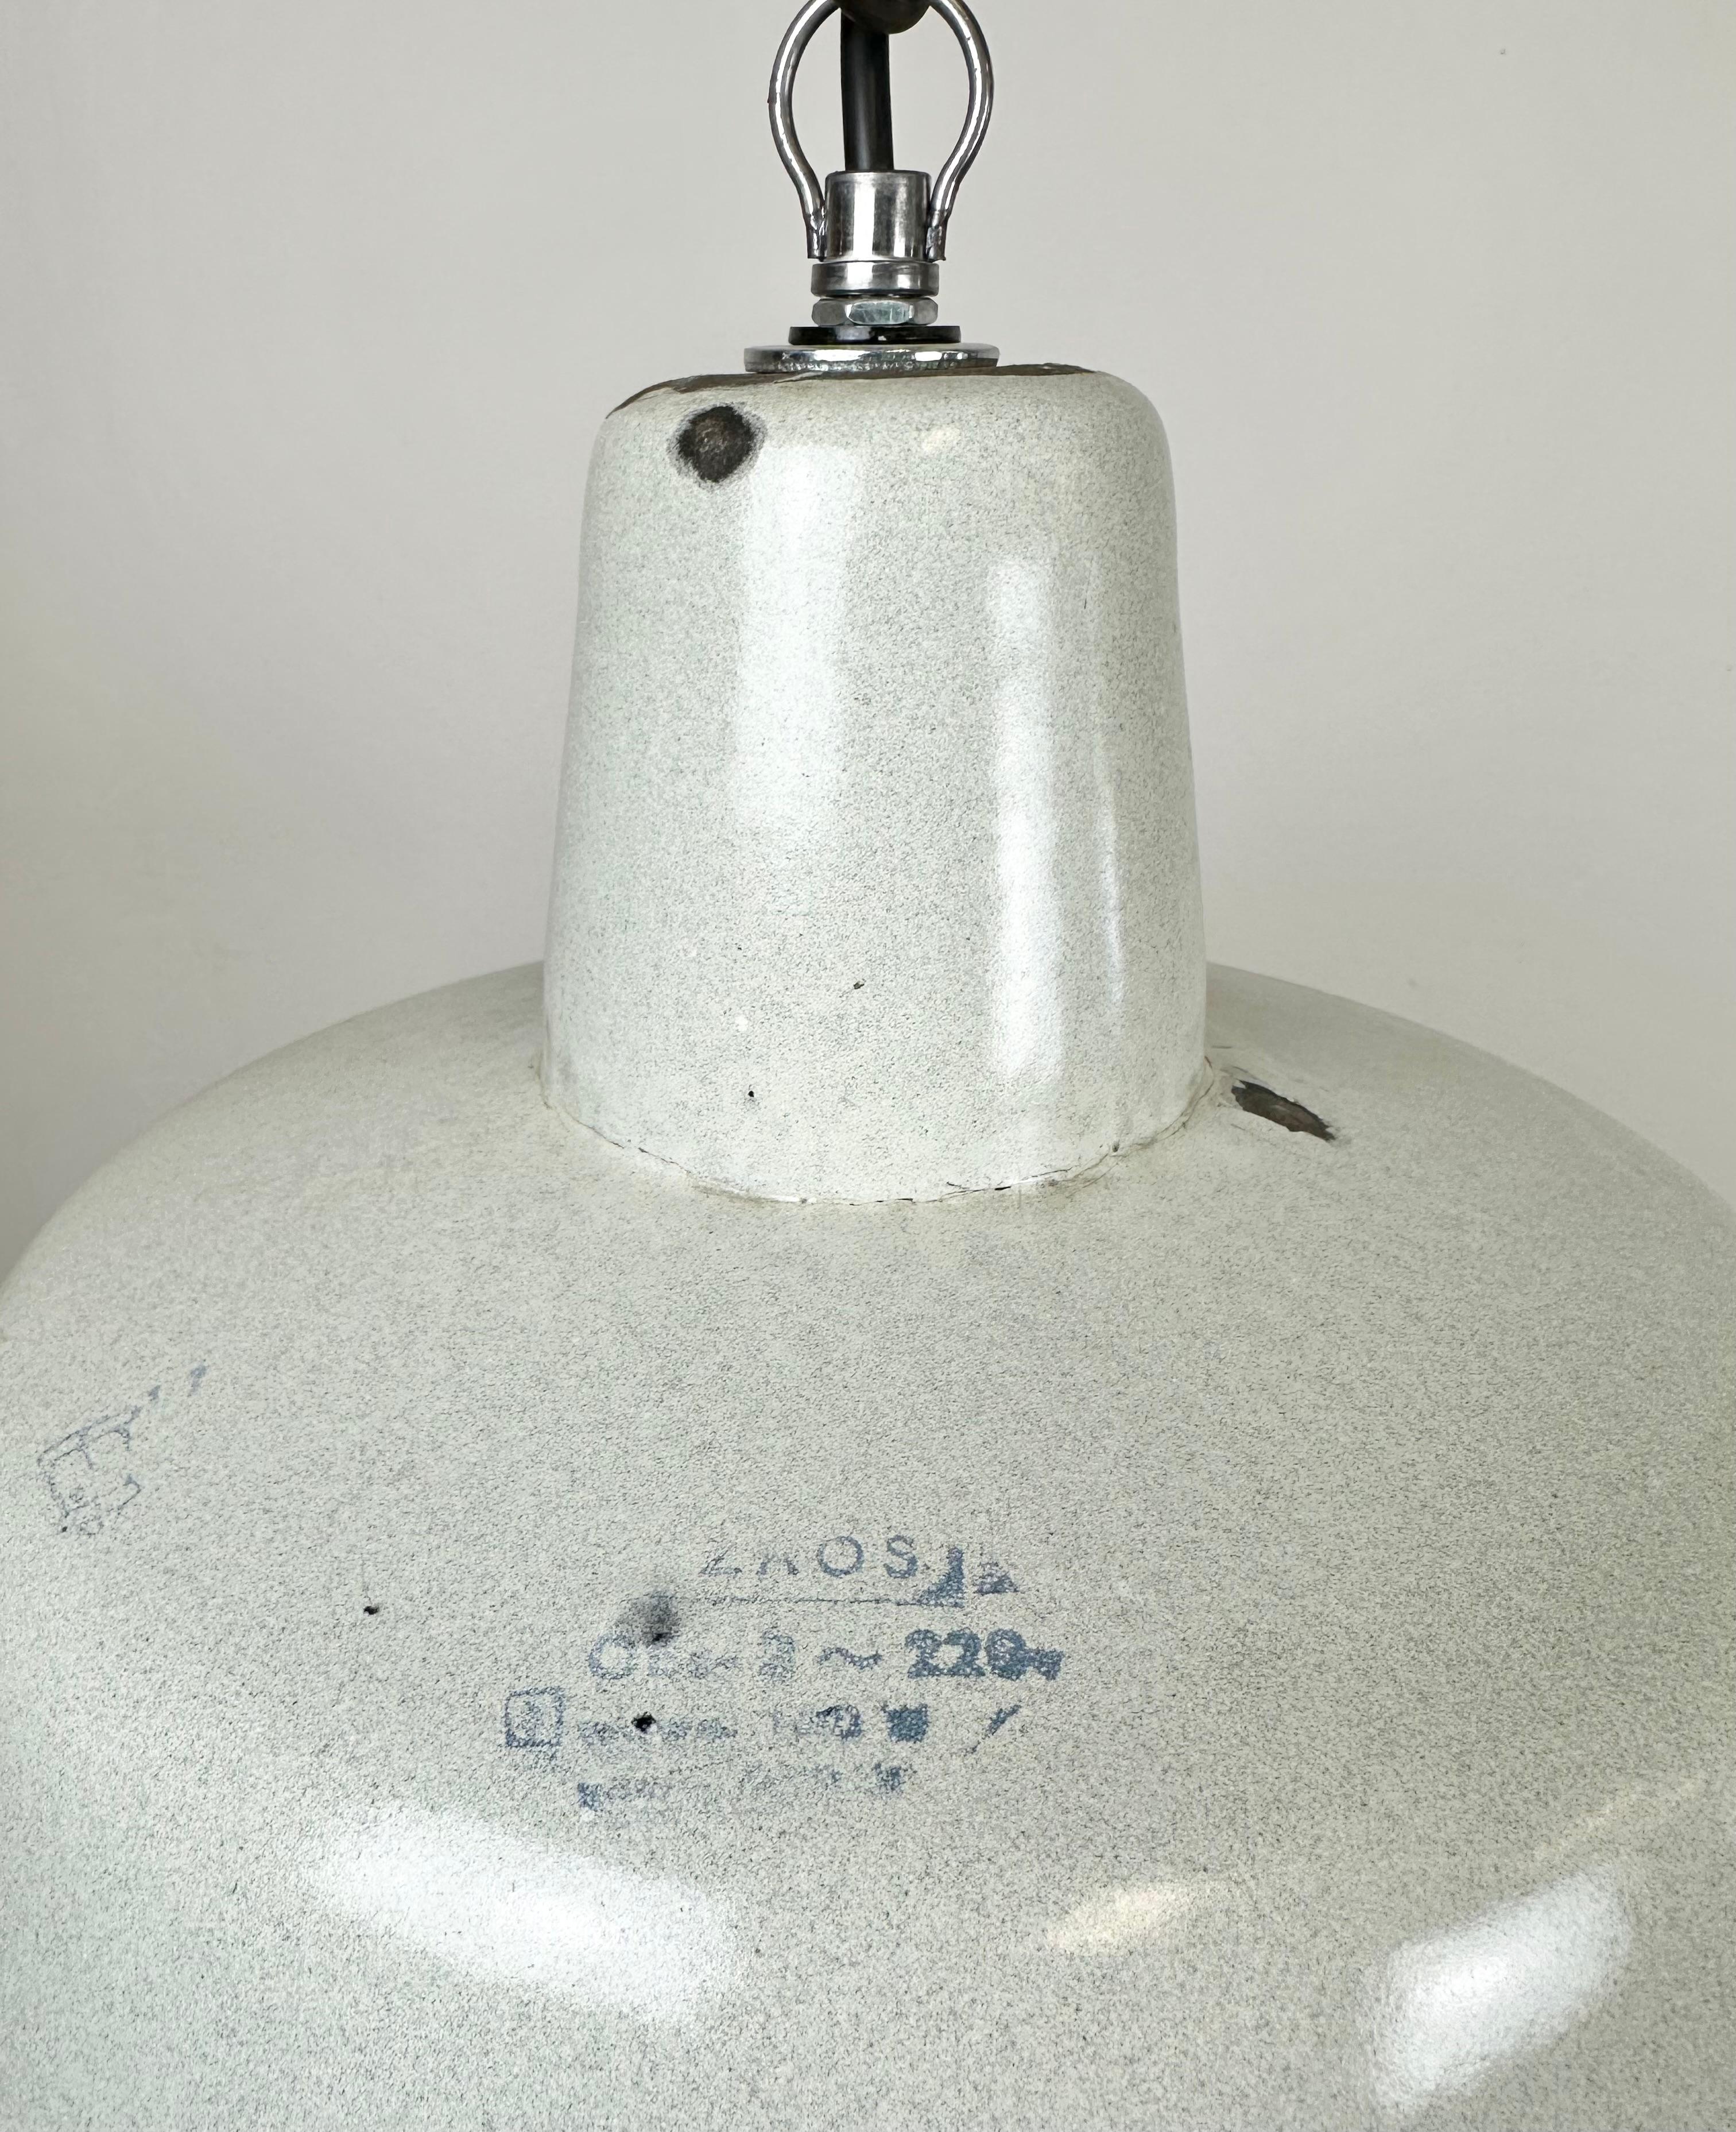 Industrial White Enamel Factory Pendant Lamp from Zaos, 1960s For Sale 3